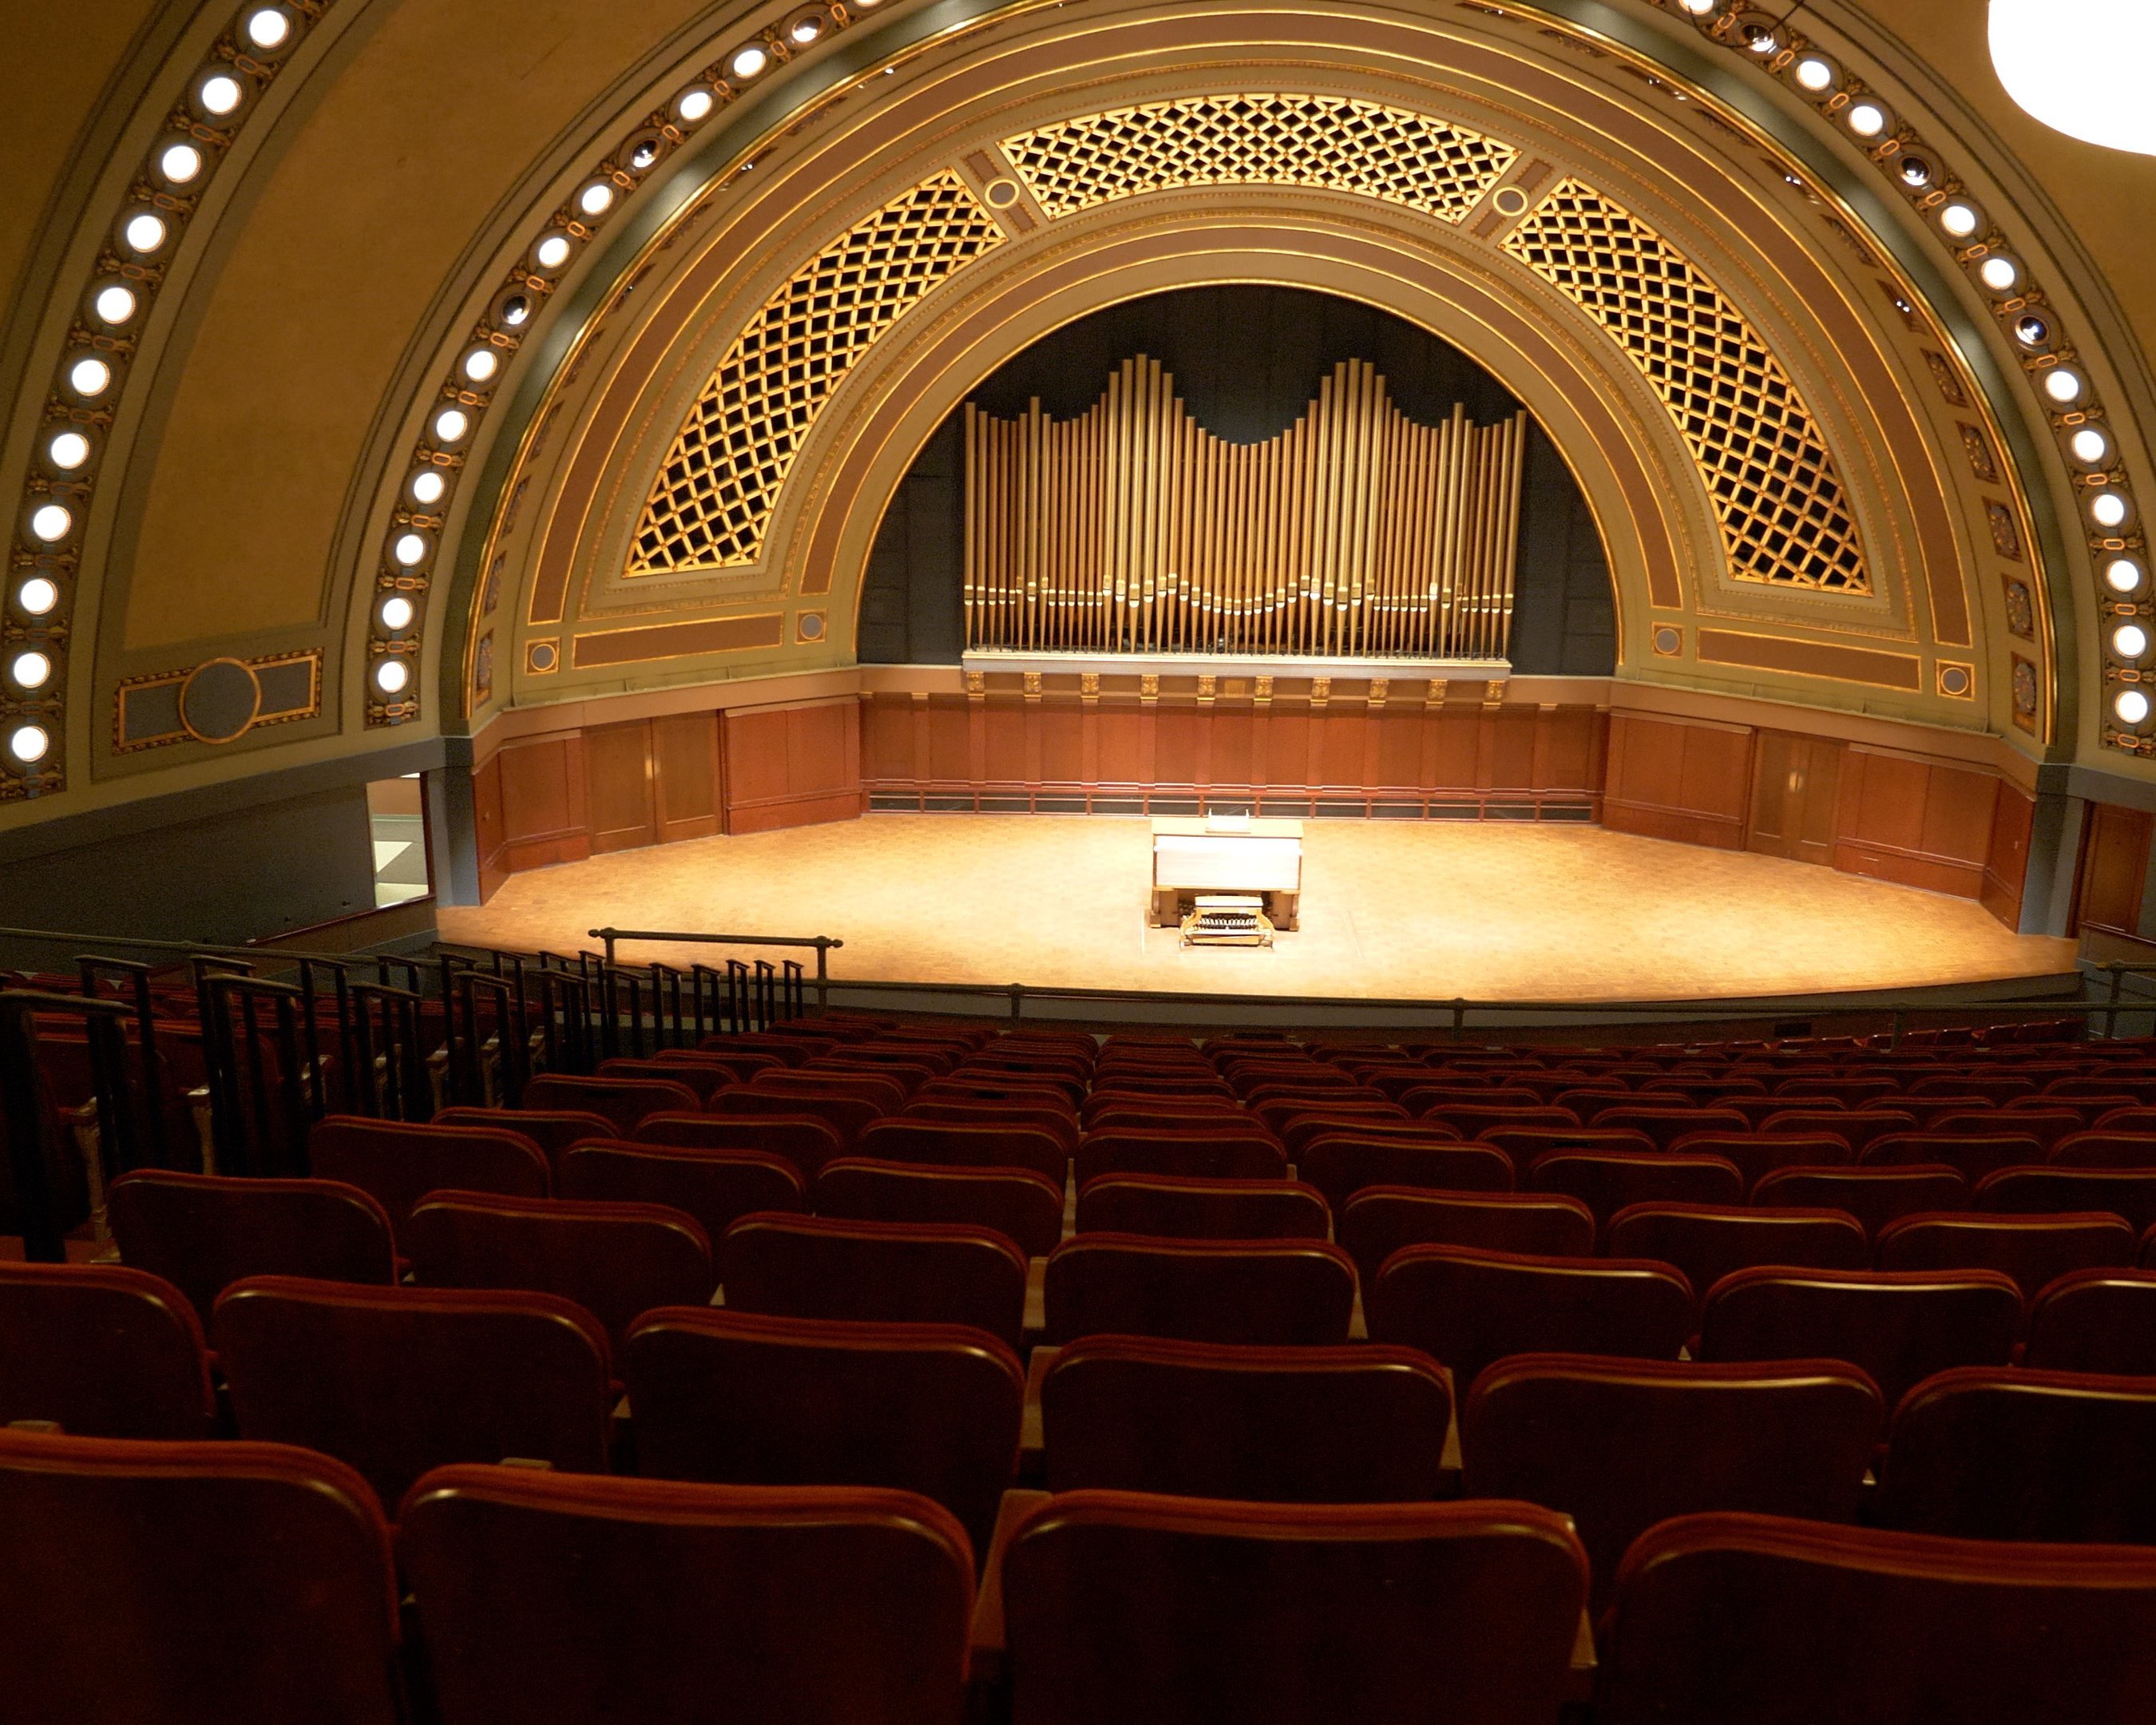 Ann Arbor concert hall with illuminated dome stage